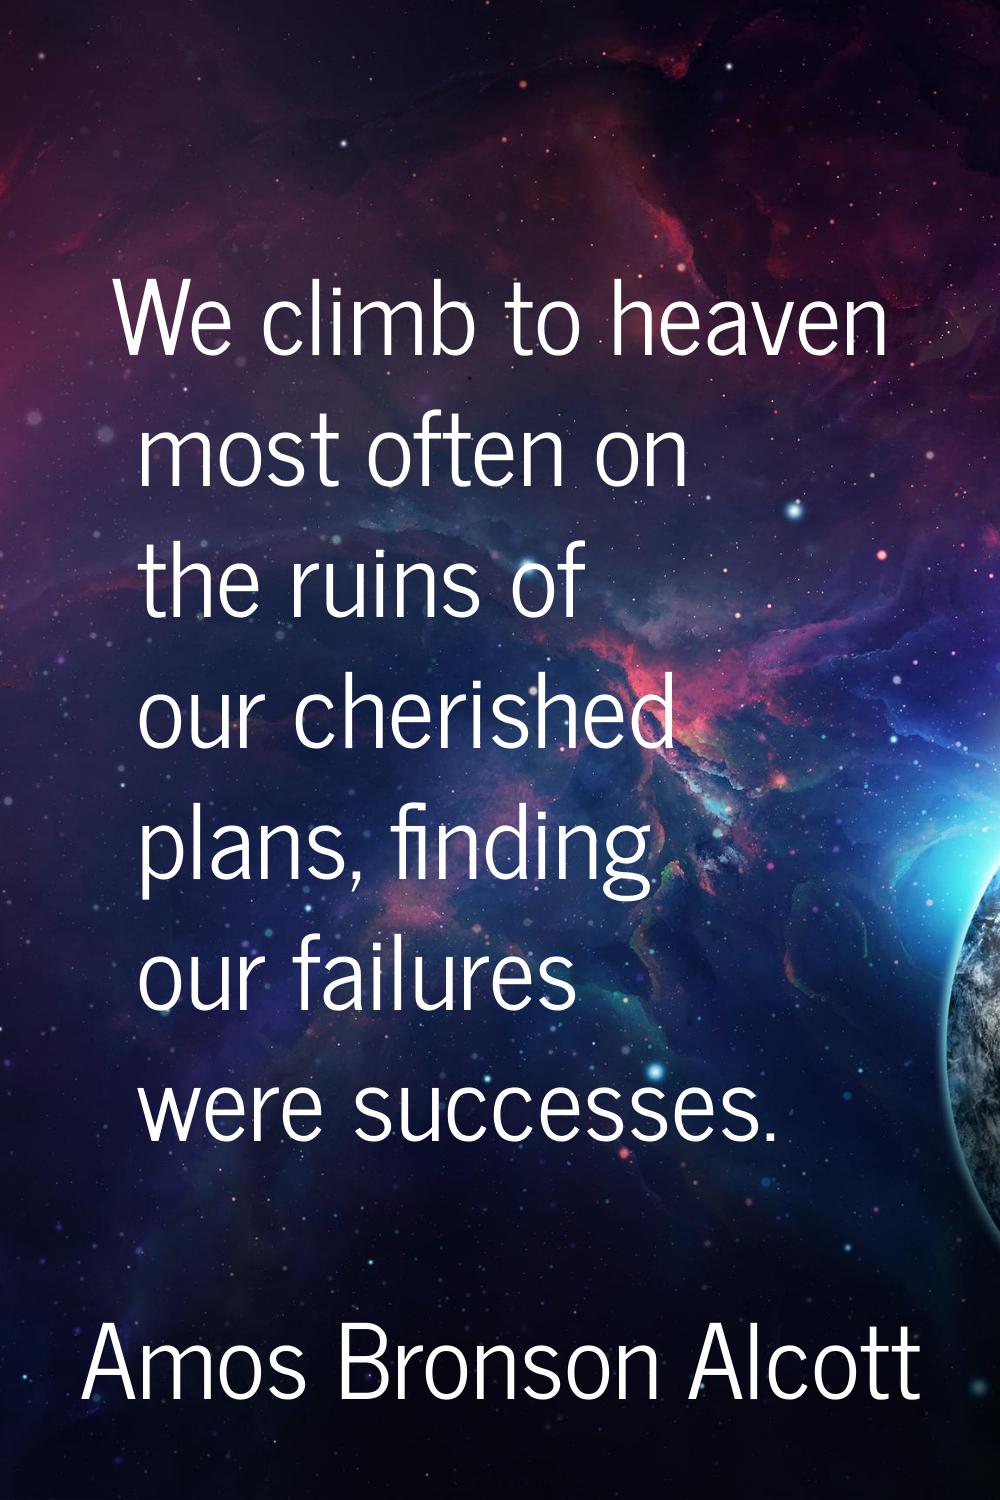 We climb to heaven most often on the ruins of our cherished plans, finding our failures were succes